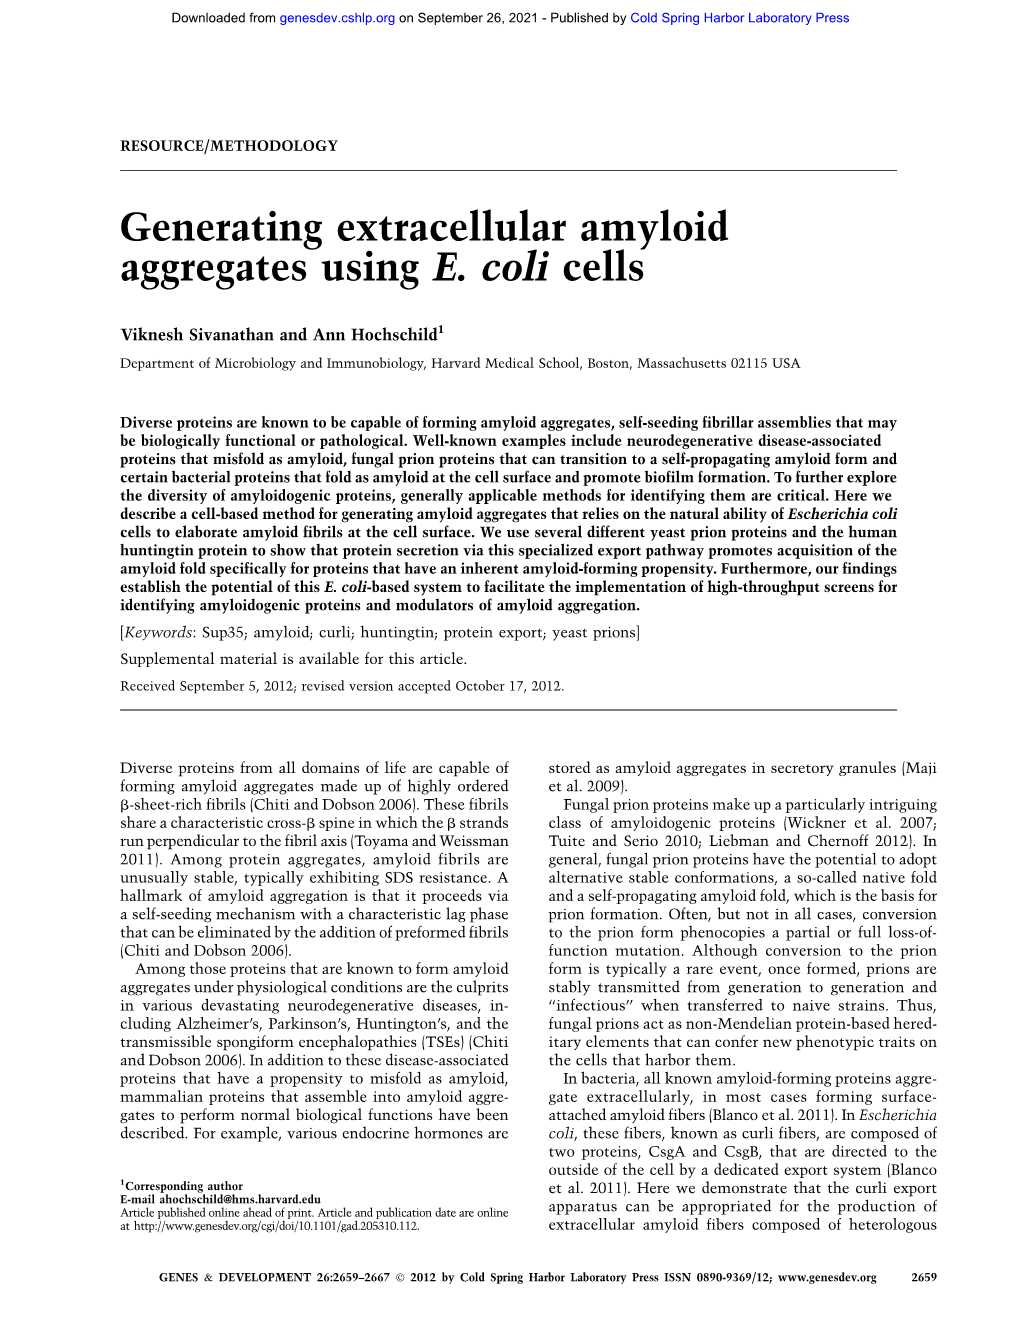 Generating Extracellular Amyloid Aggregates Using E. Coli Cells